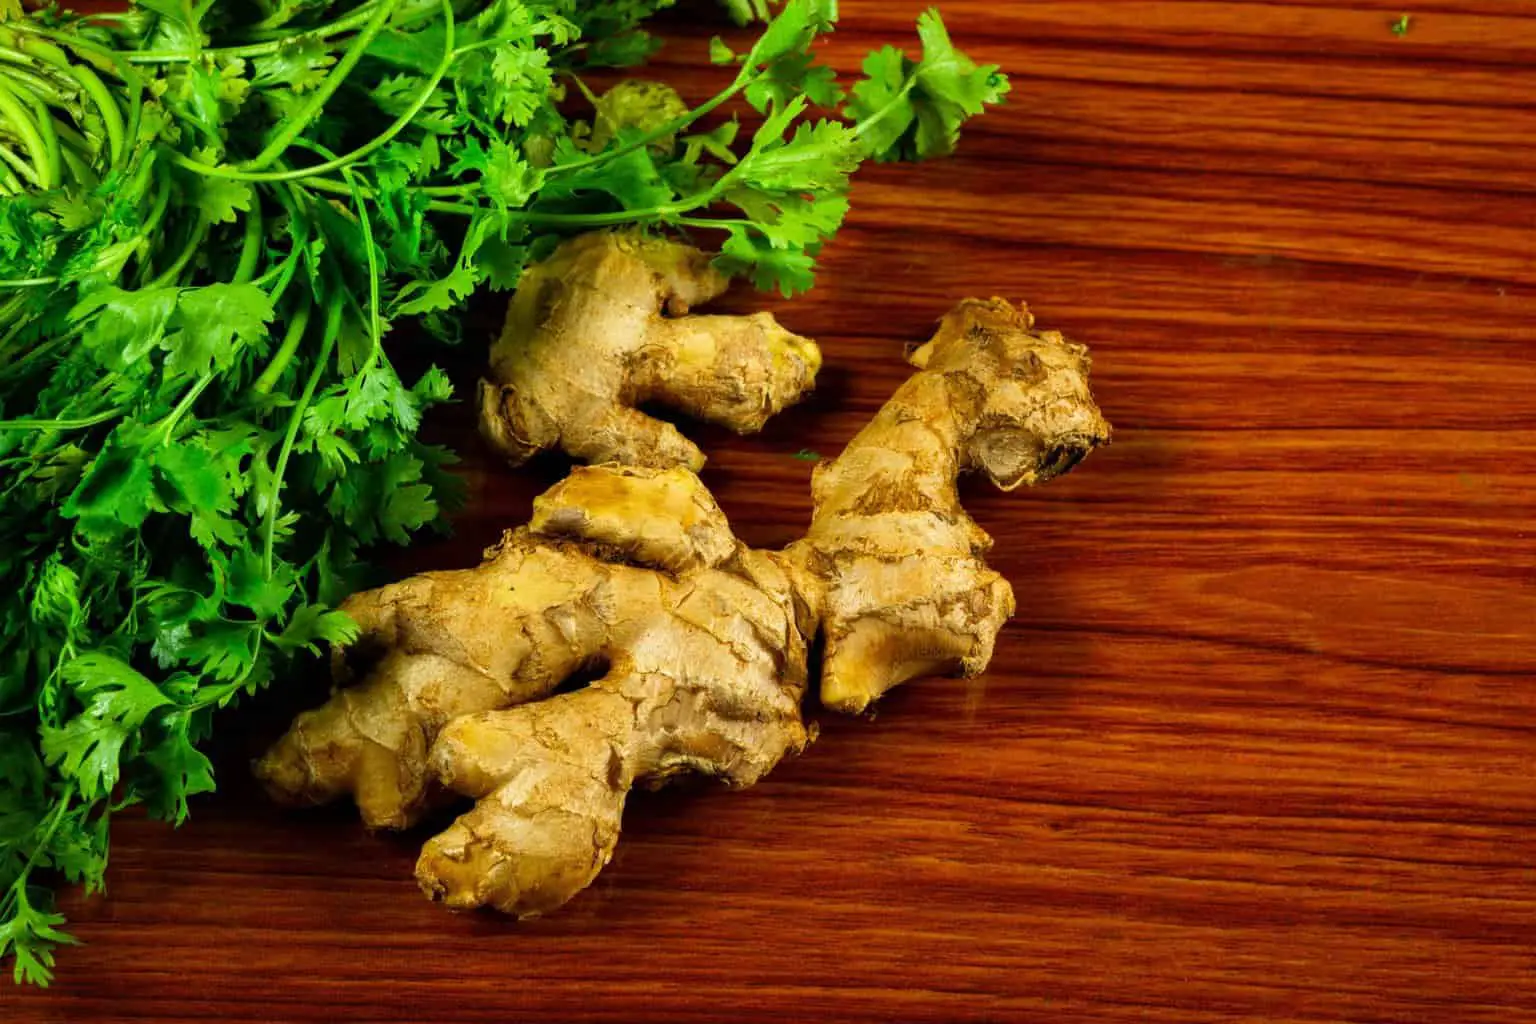 Why Is Ginger Good For Your Health?